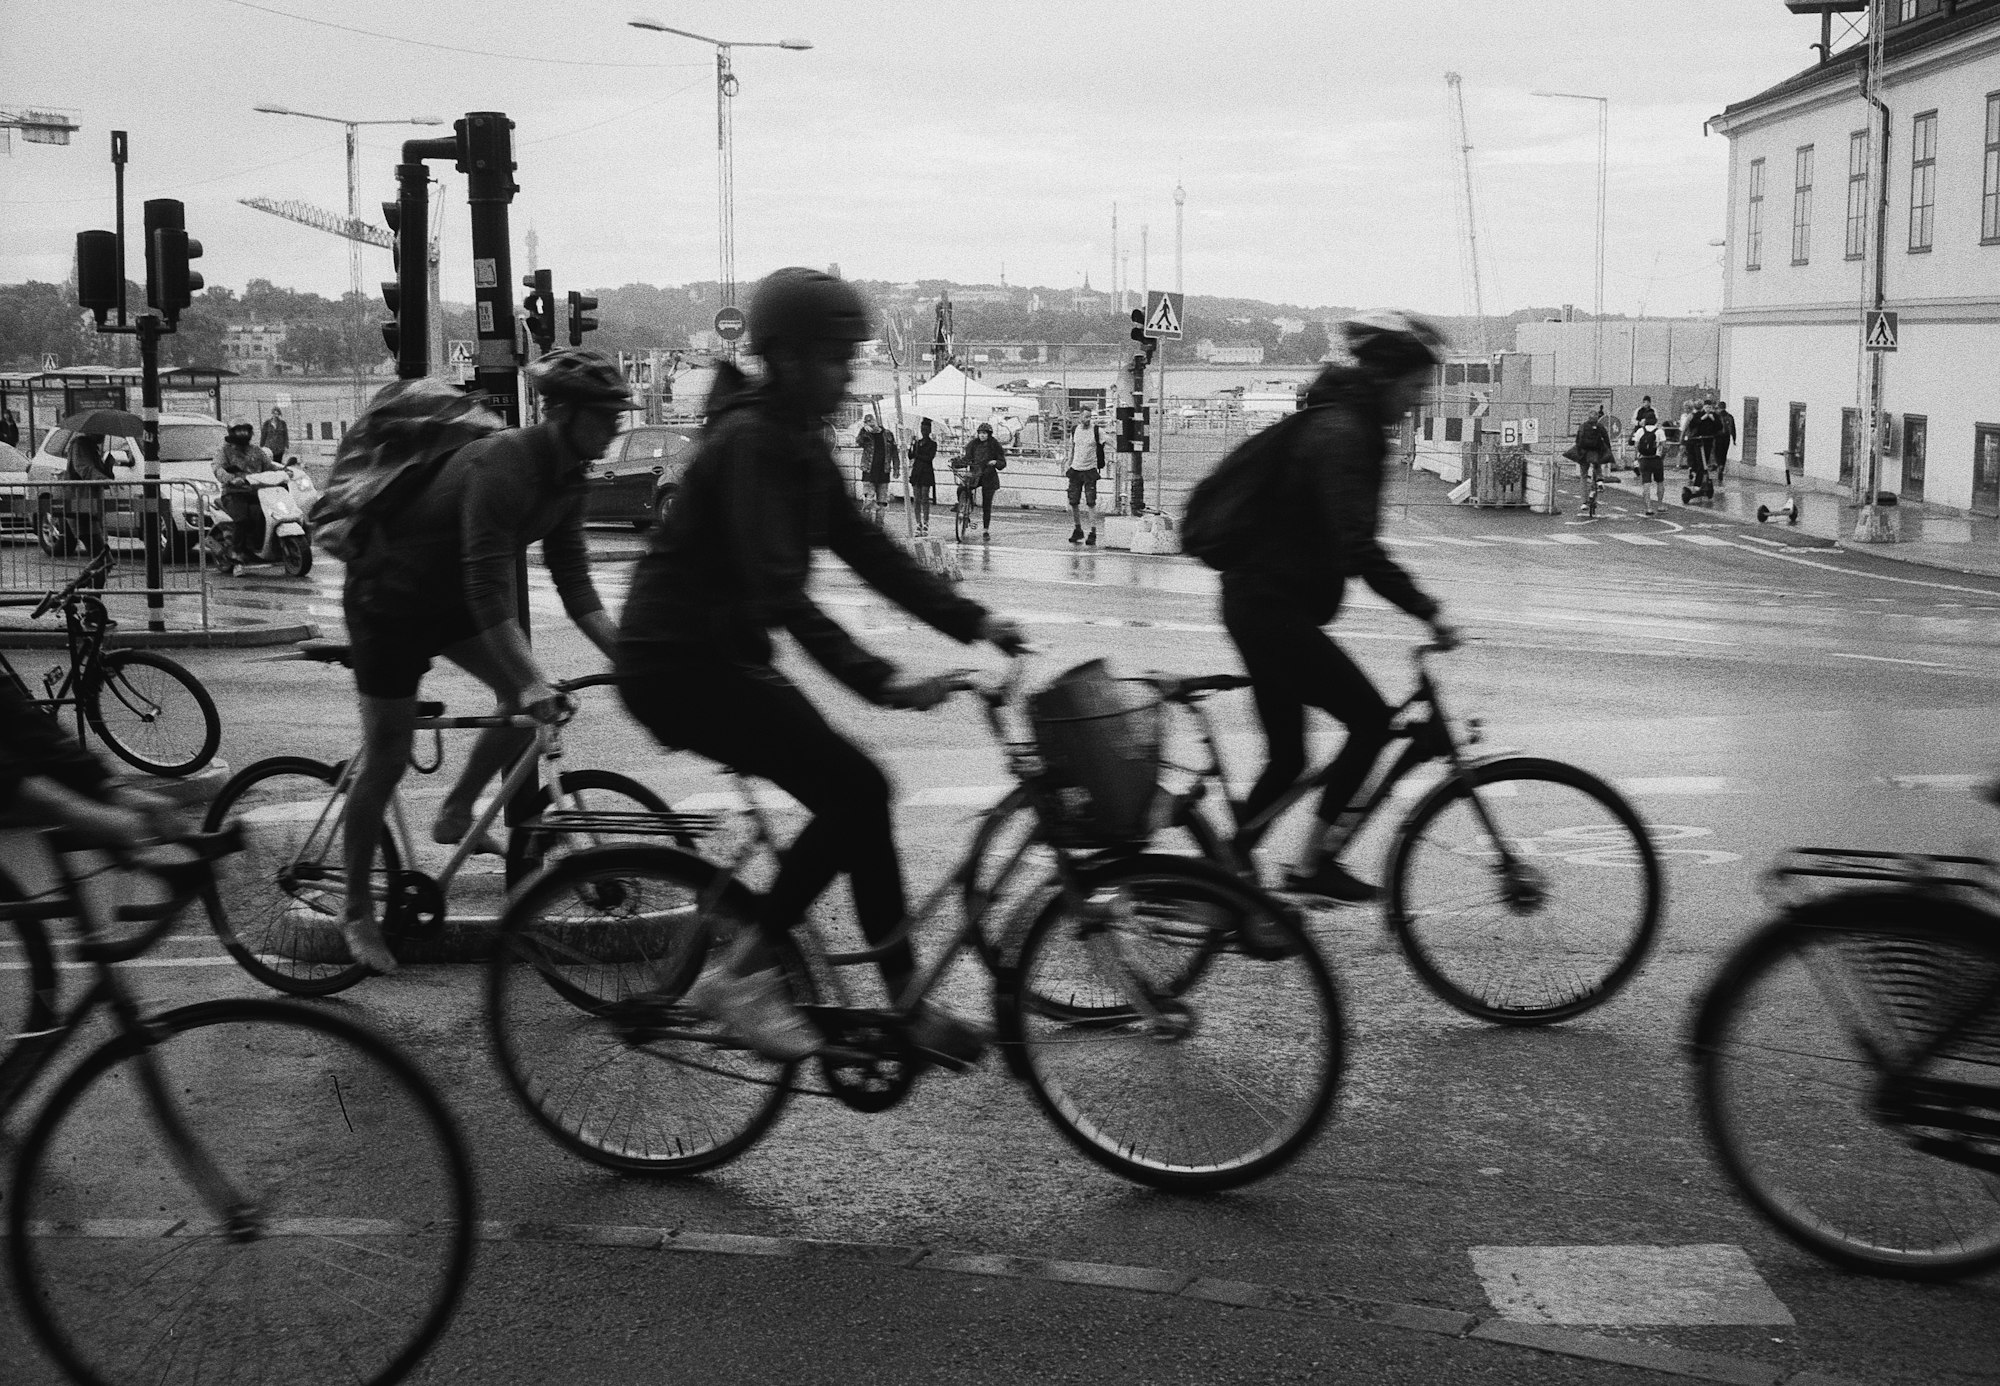 Cyclists at rush hour